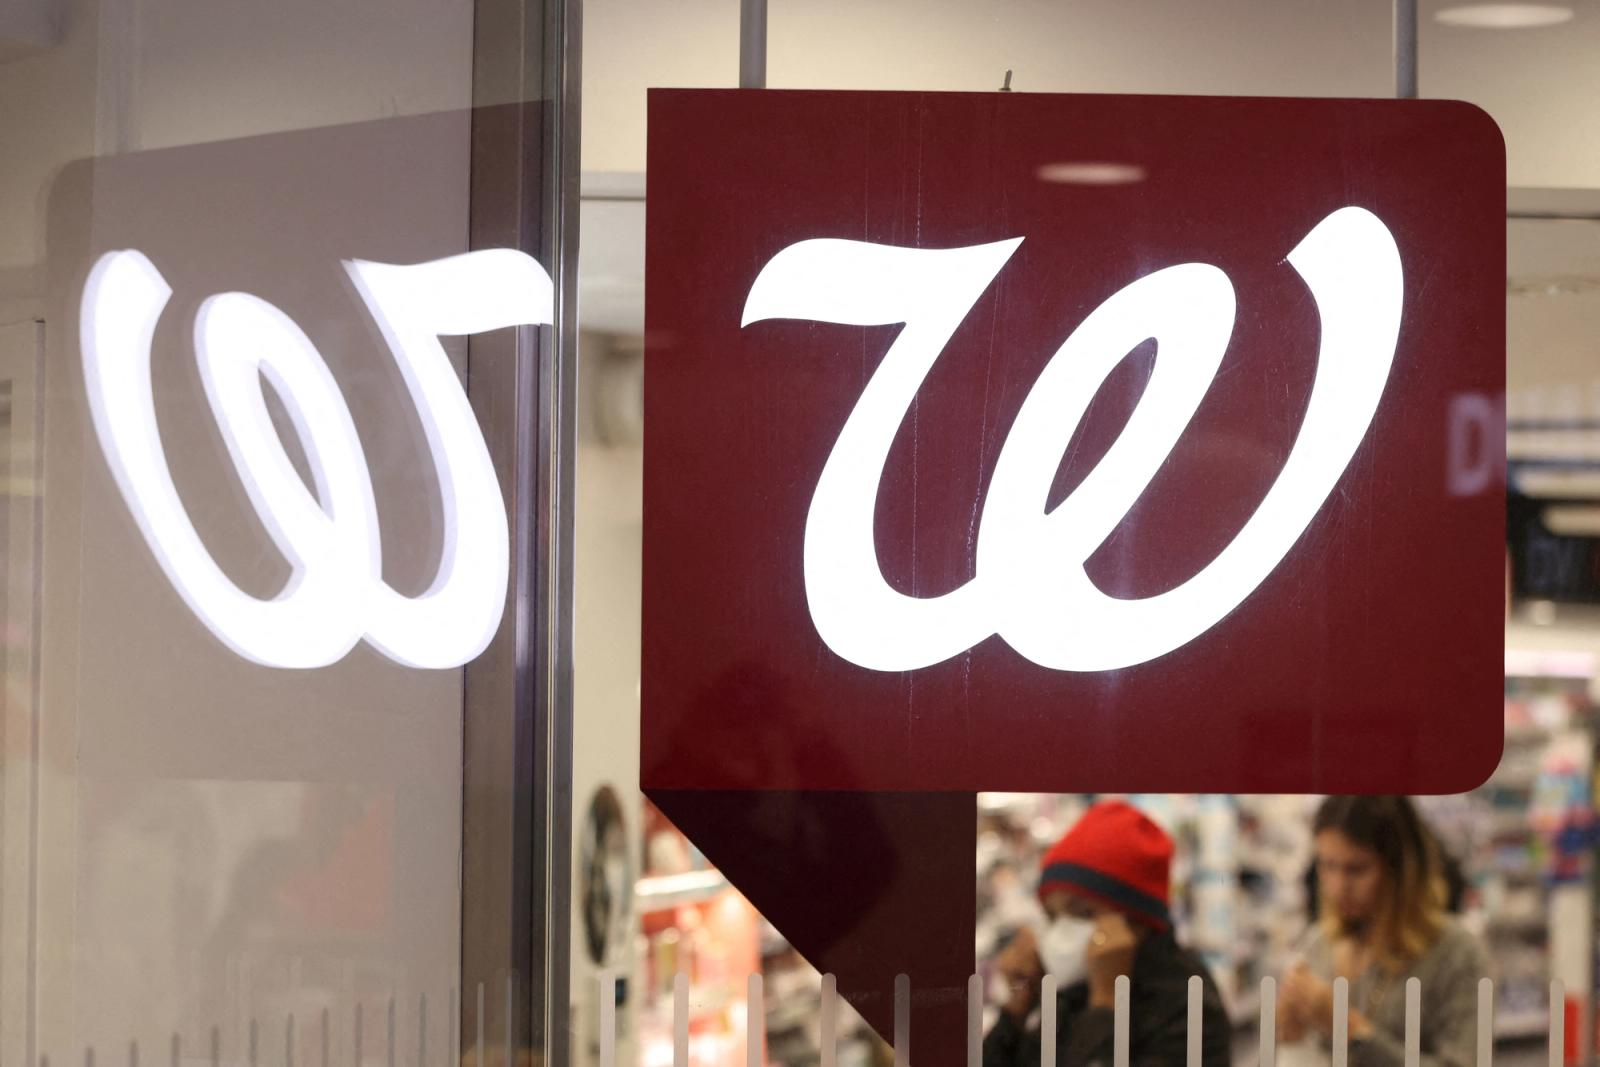 People are seen shopping in a Walgreens, owned by the Walgreens Boots Alliance, Inc., in Manhattan, New York City, U.S.